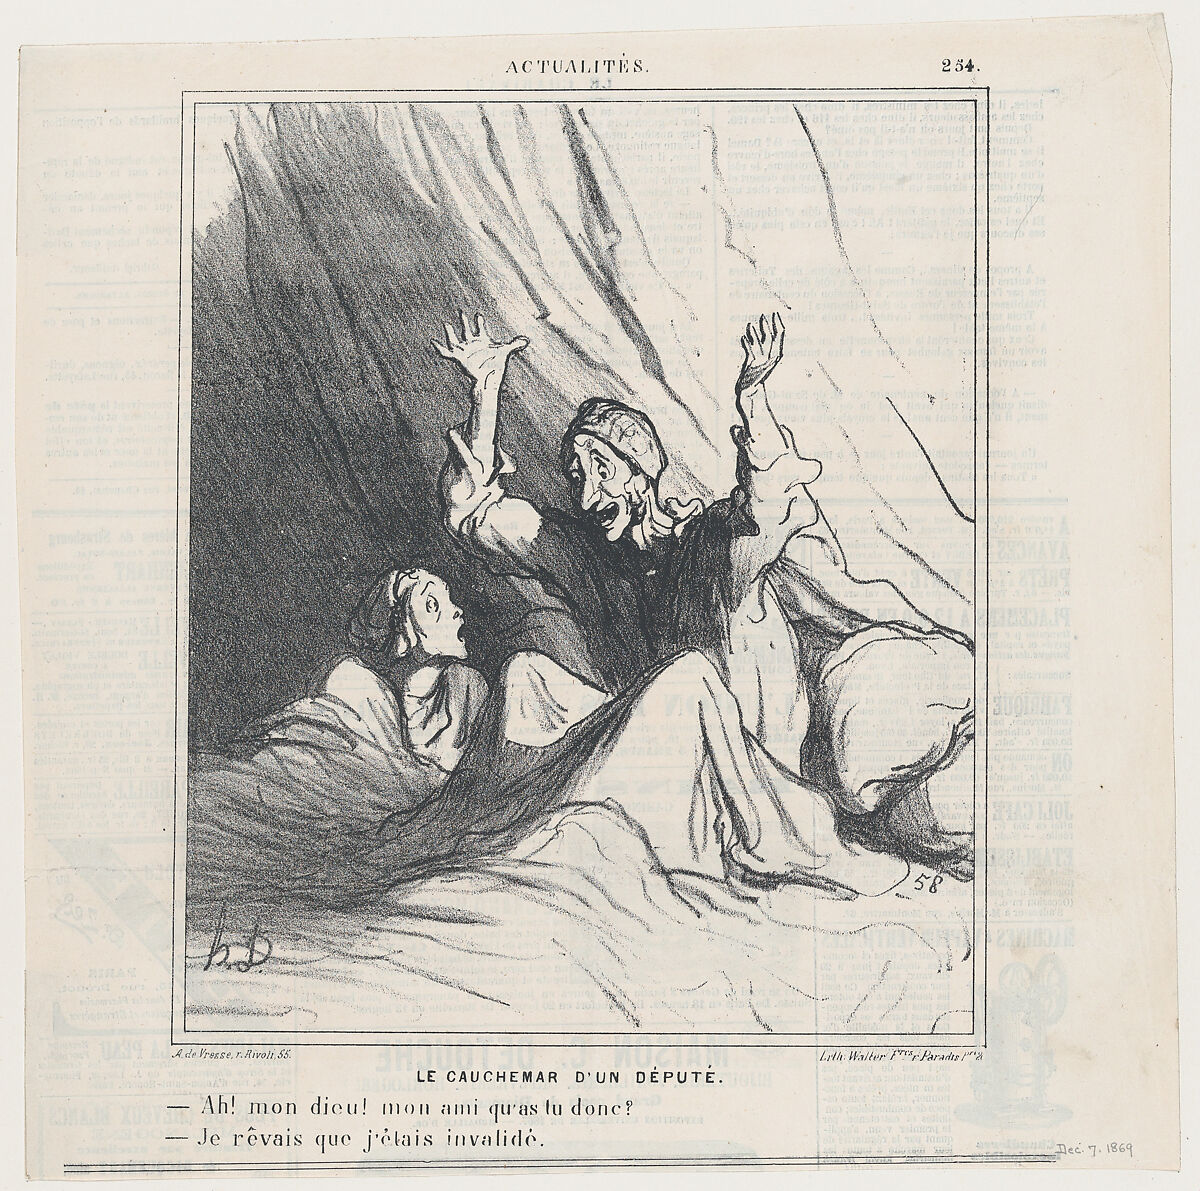 A deputy's nightmare: –Oh my friend, what has happened? –I dreamed I was invalidated, from 'News of the day,' published in Le Charivari, December 7, 1869, Honoré Daumier (French, Marseilles 1808–1879 Valmondois), Lithograph on newsprint; second state of two (Delteil) 